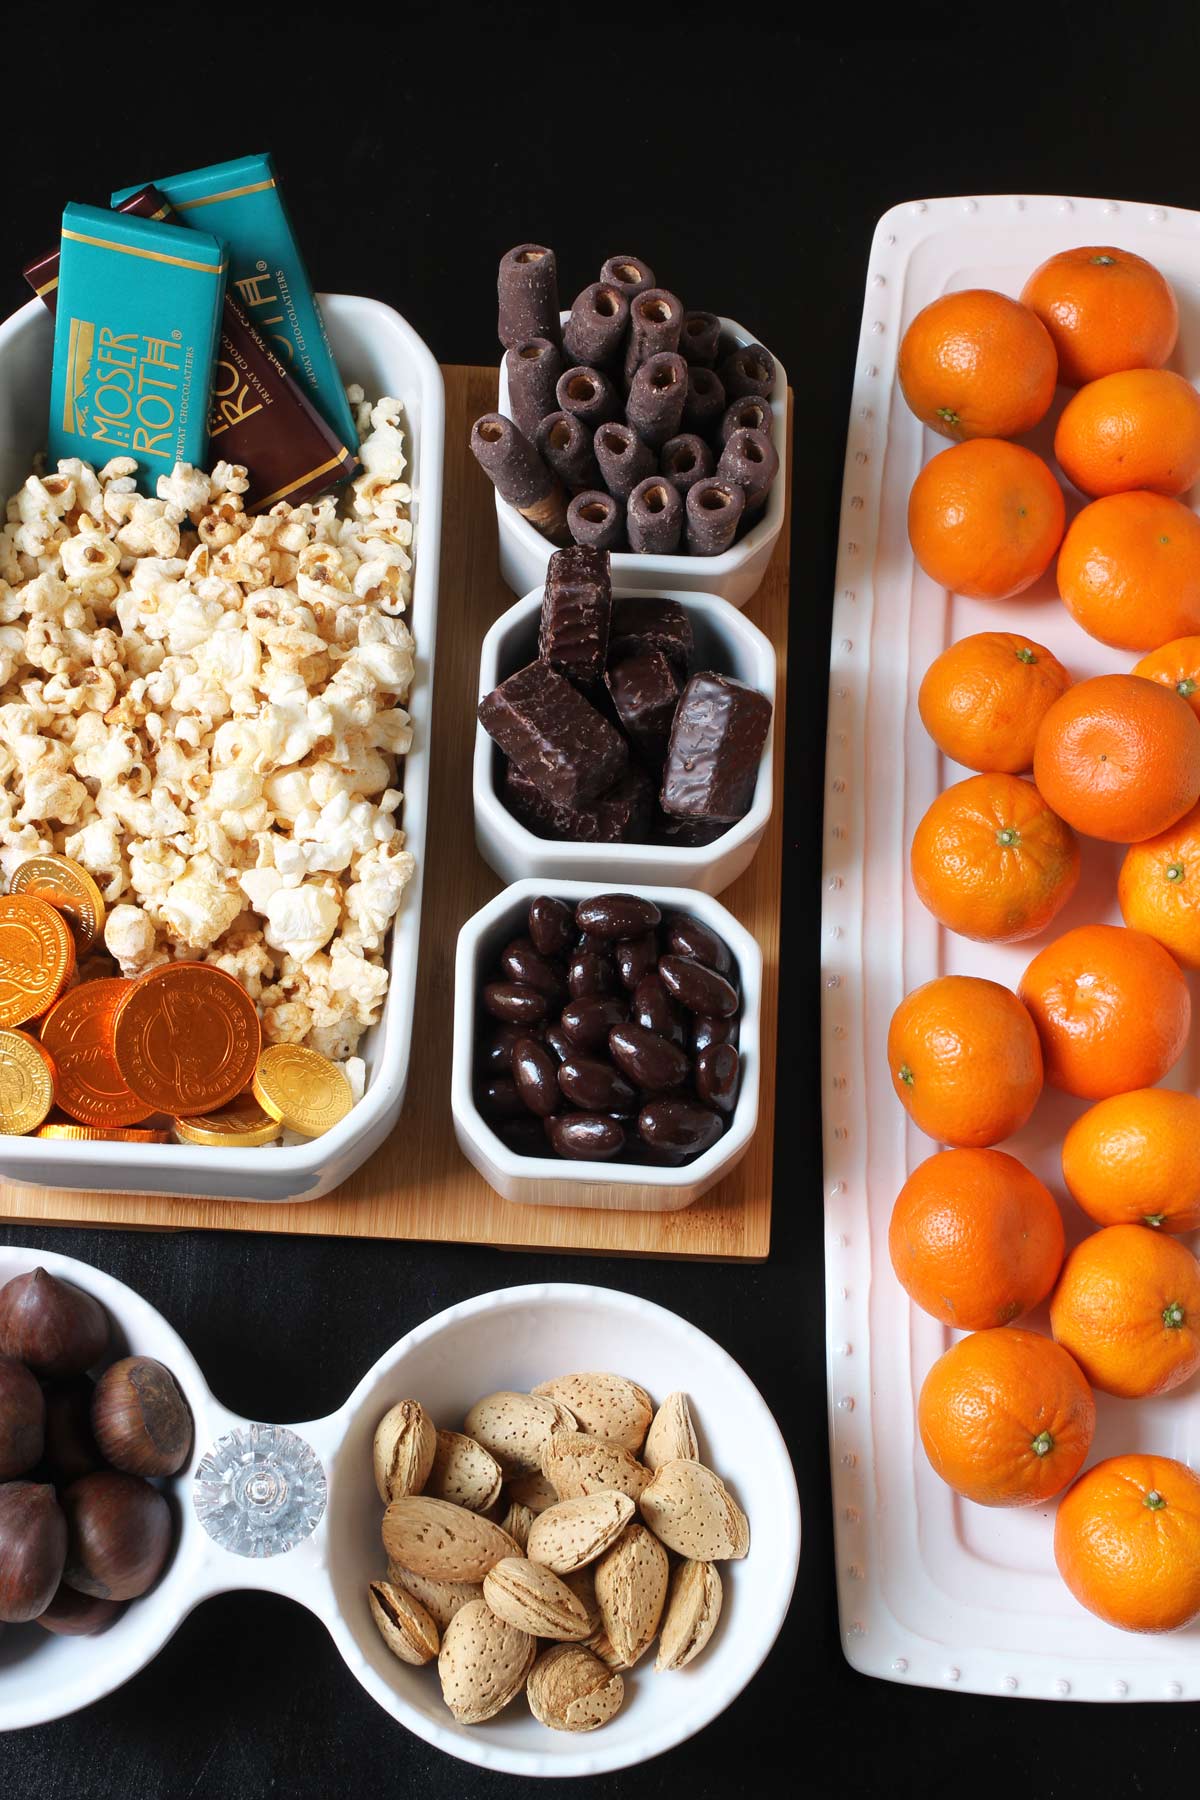 fruit, chocolate, nuts, and popcorn laid out on platters.